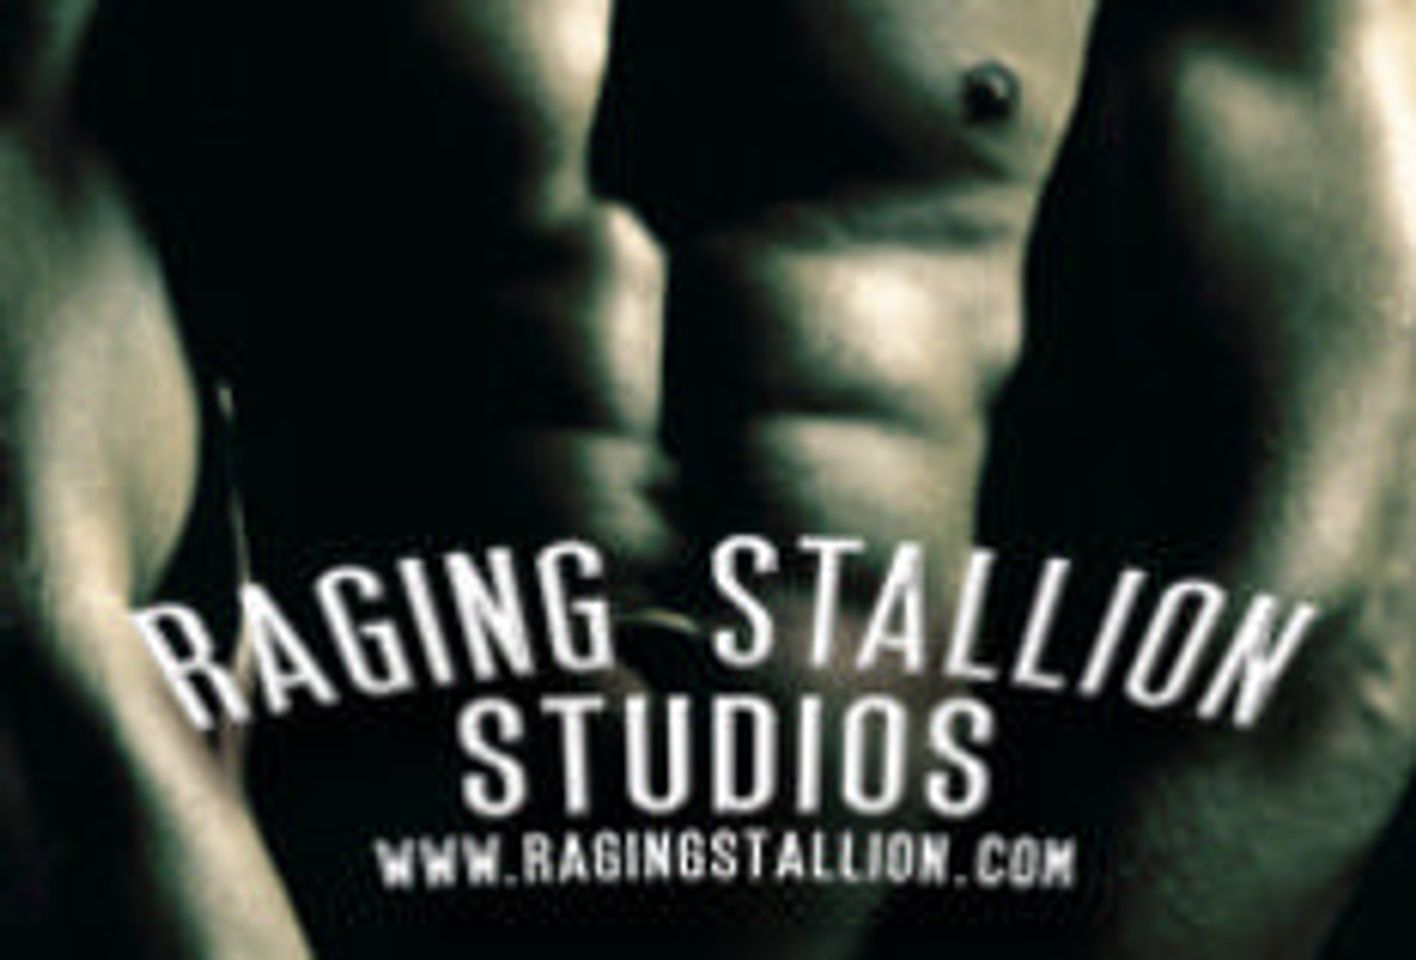 AdamMale and Raging Stallion Release First Co-Production